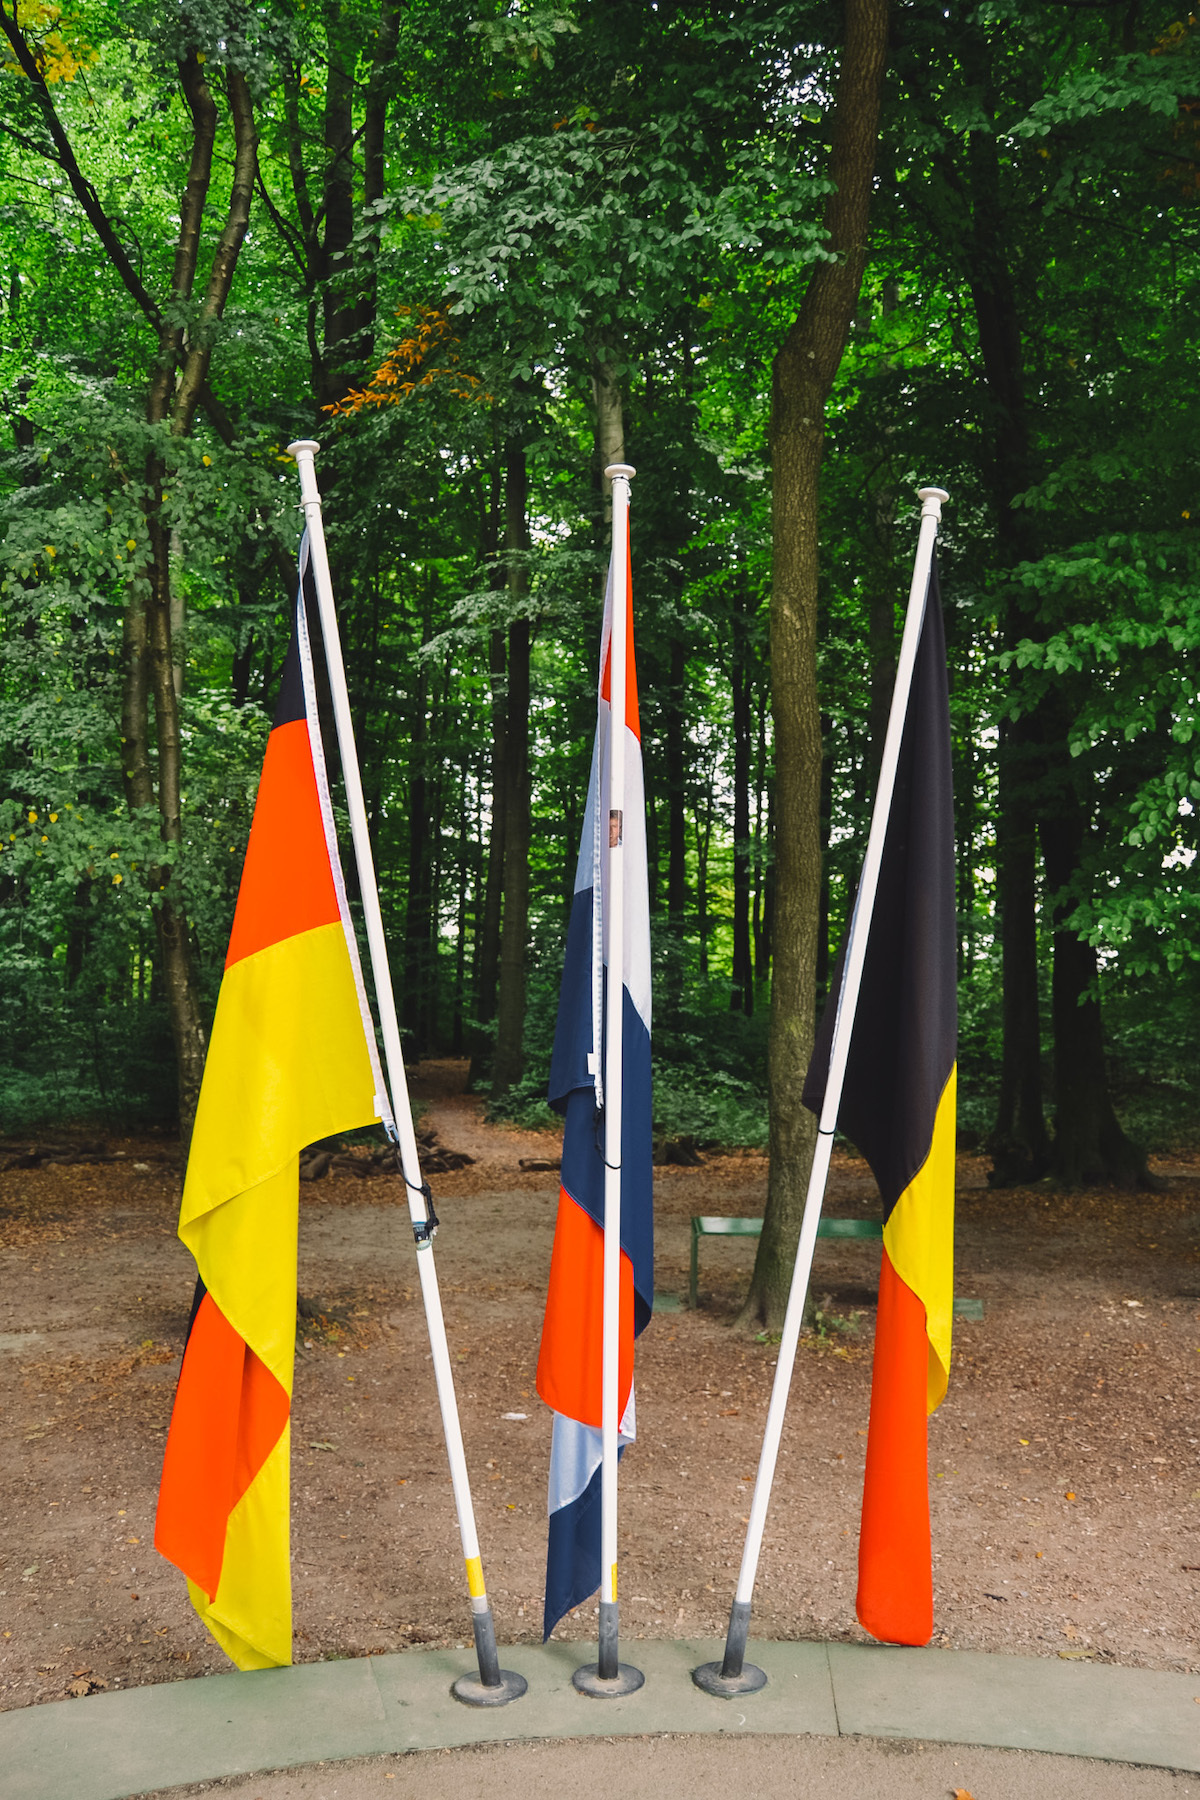 The flags of Germany, the Netherlands, and Belgium at the Three Country Point. 